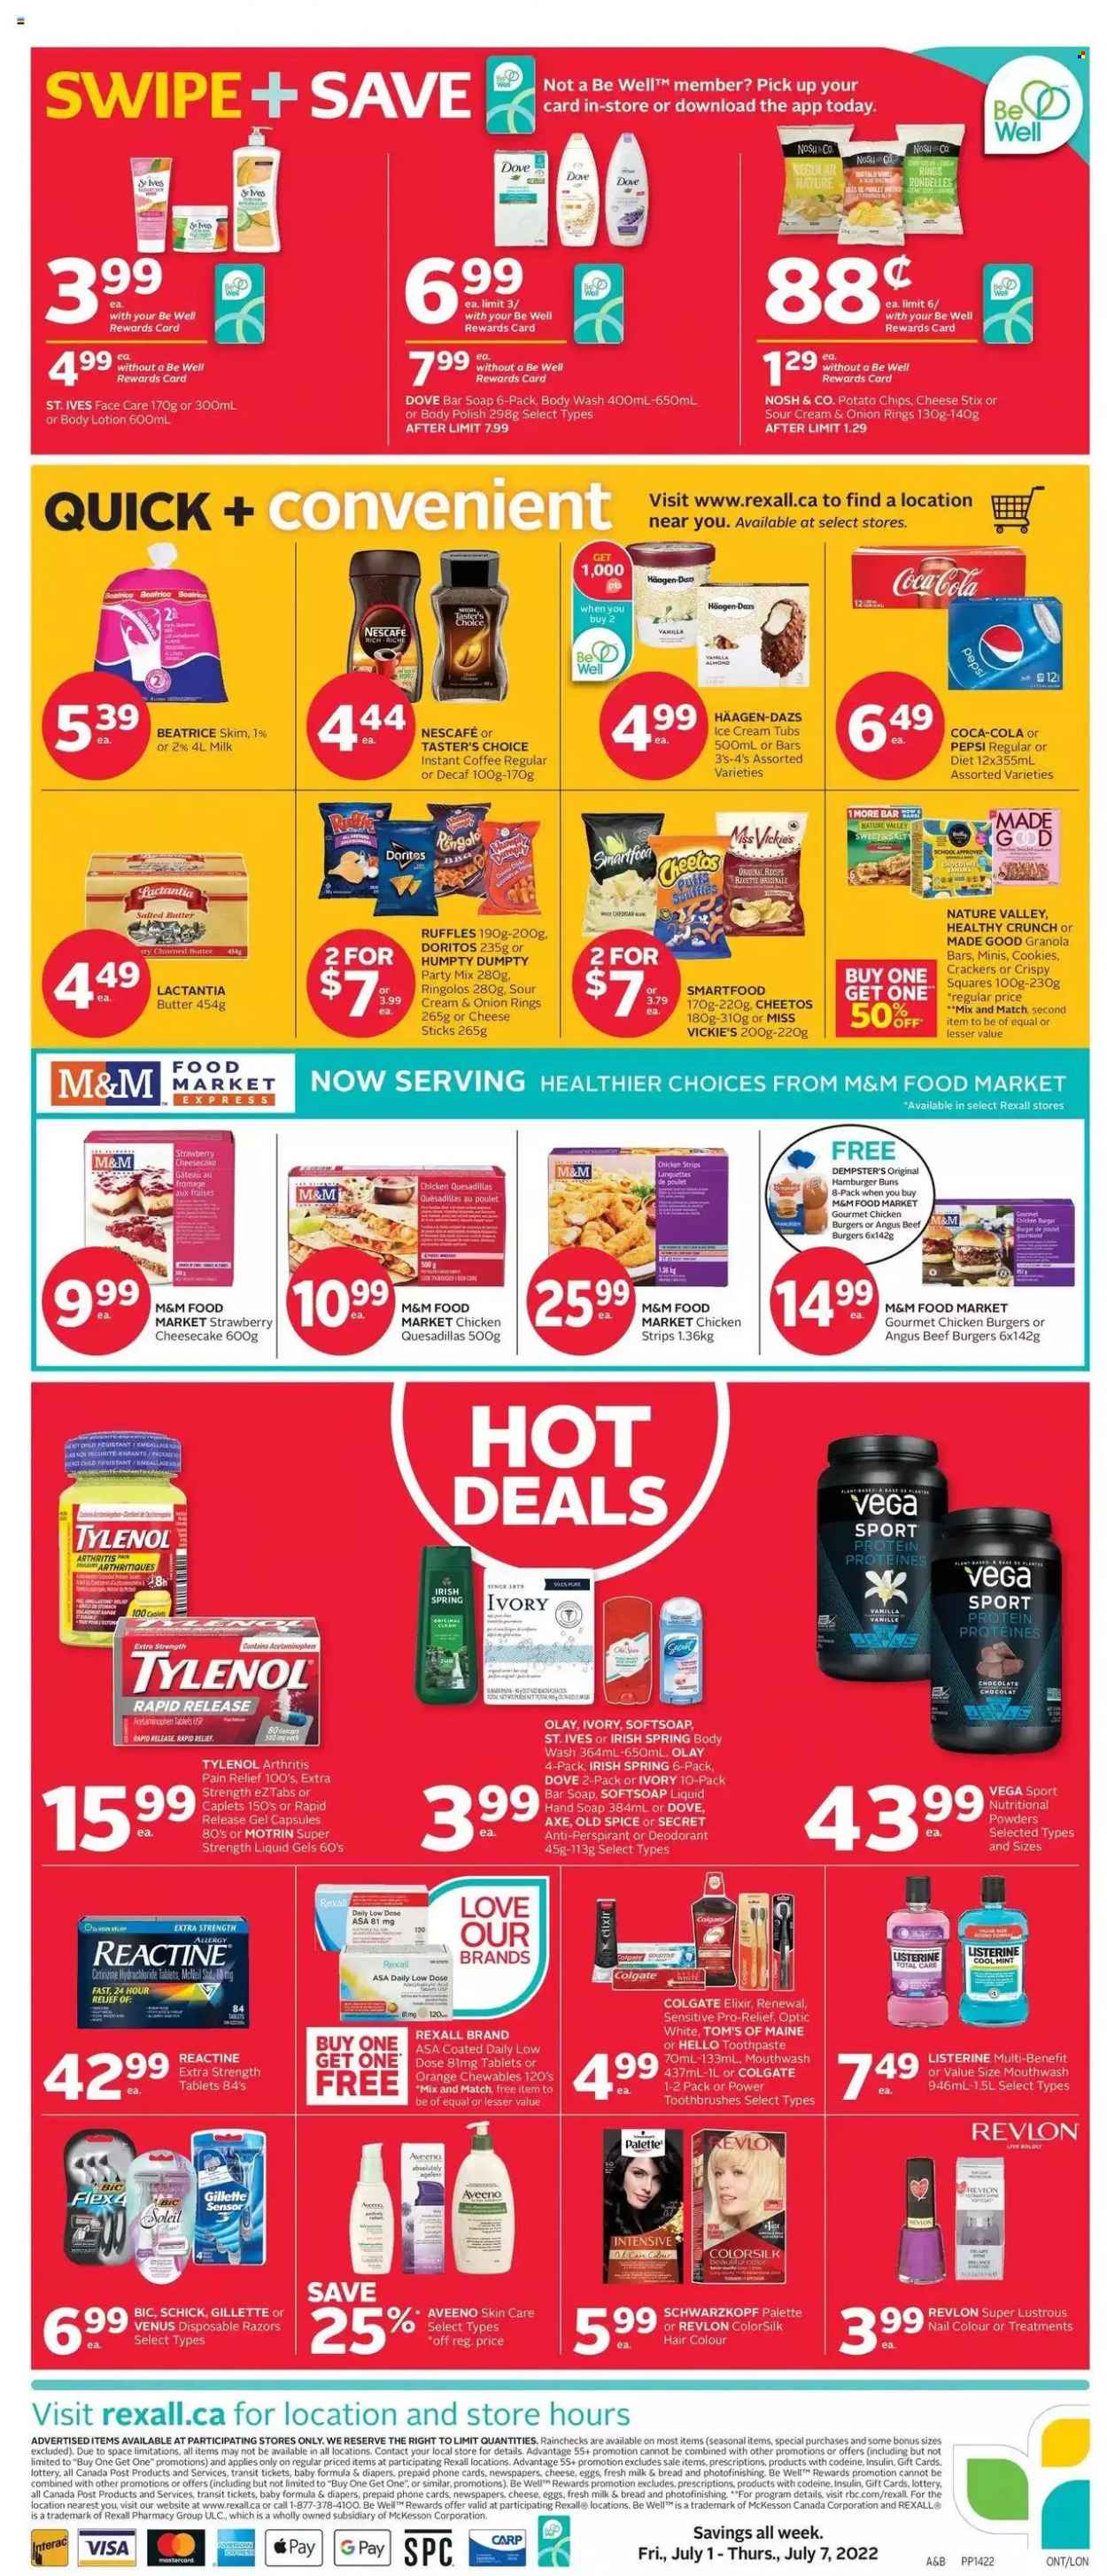 thumbnail - Rexall Flyer - July 01, 2022 - July 07, 2022 - Sales products - bread, buns, burger buns, eggs, onion rings, strips, chicken strips, cheese sticks, cookies, crackers, Doritos, potato chips, Cheetos, chips, Smartfood, Ruffles, granola bar, Nature Valley, spice, Coca-Cola, Pepsi, instant coffee, nappies, Aveeno, body wash, Softsoap, hand soap, soap bar, soap, toothpaste, mouthwash, Gillette, Olay, Revlon, Palette, hair color, body lotion, anti-perspirant, Axe, BIC, Schick, Venus, disposable razor, polish, pain relief, Tylenol, Low Dose, Motrin, Dove, Colgate, Listerine, Old Spice, Schwarzkopf, Nescafé, M&M's, deodorant. Page 8.